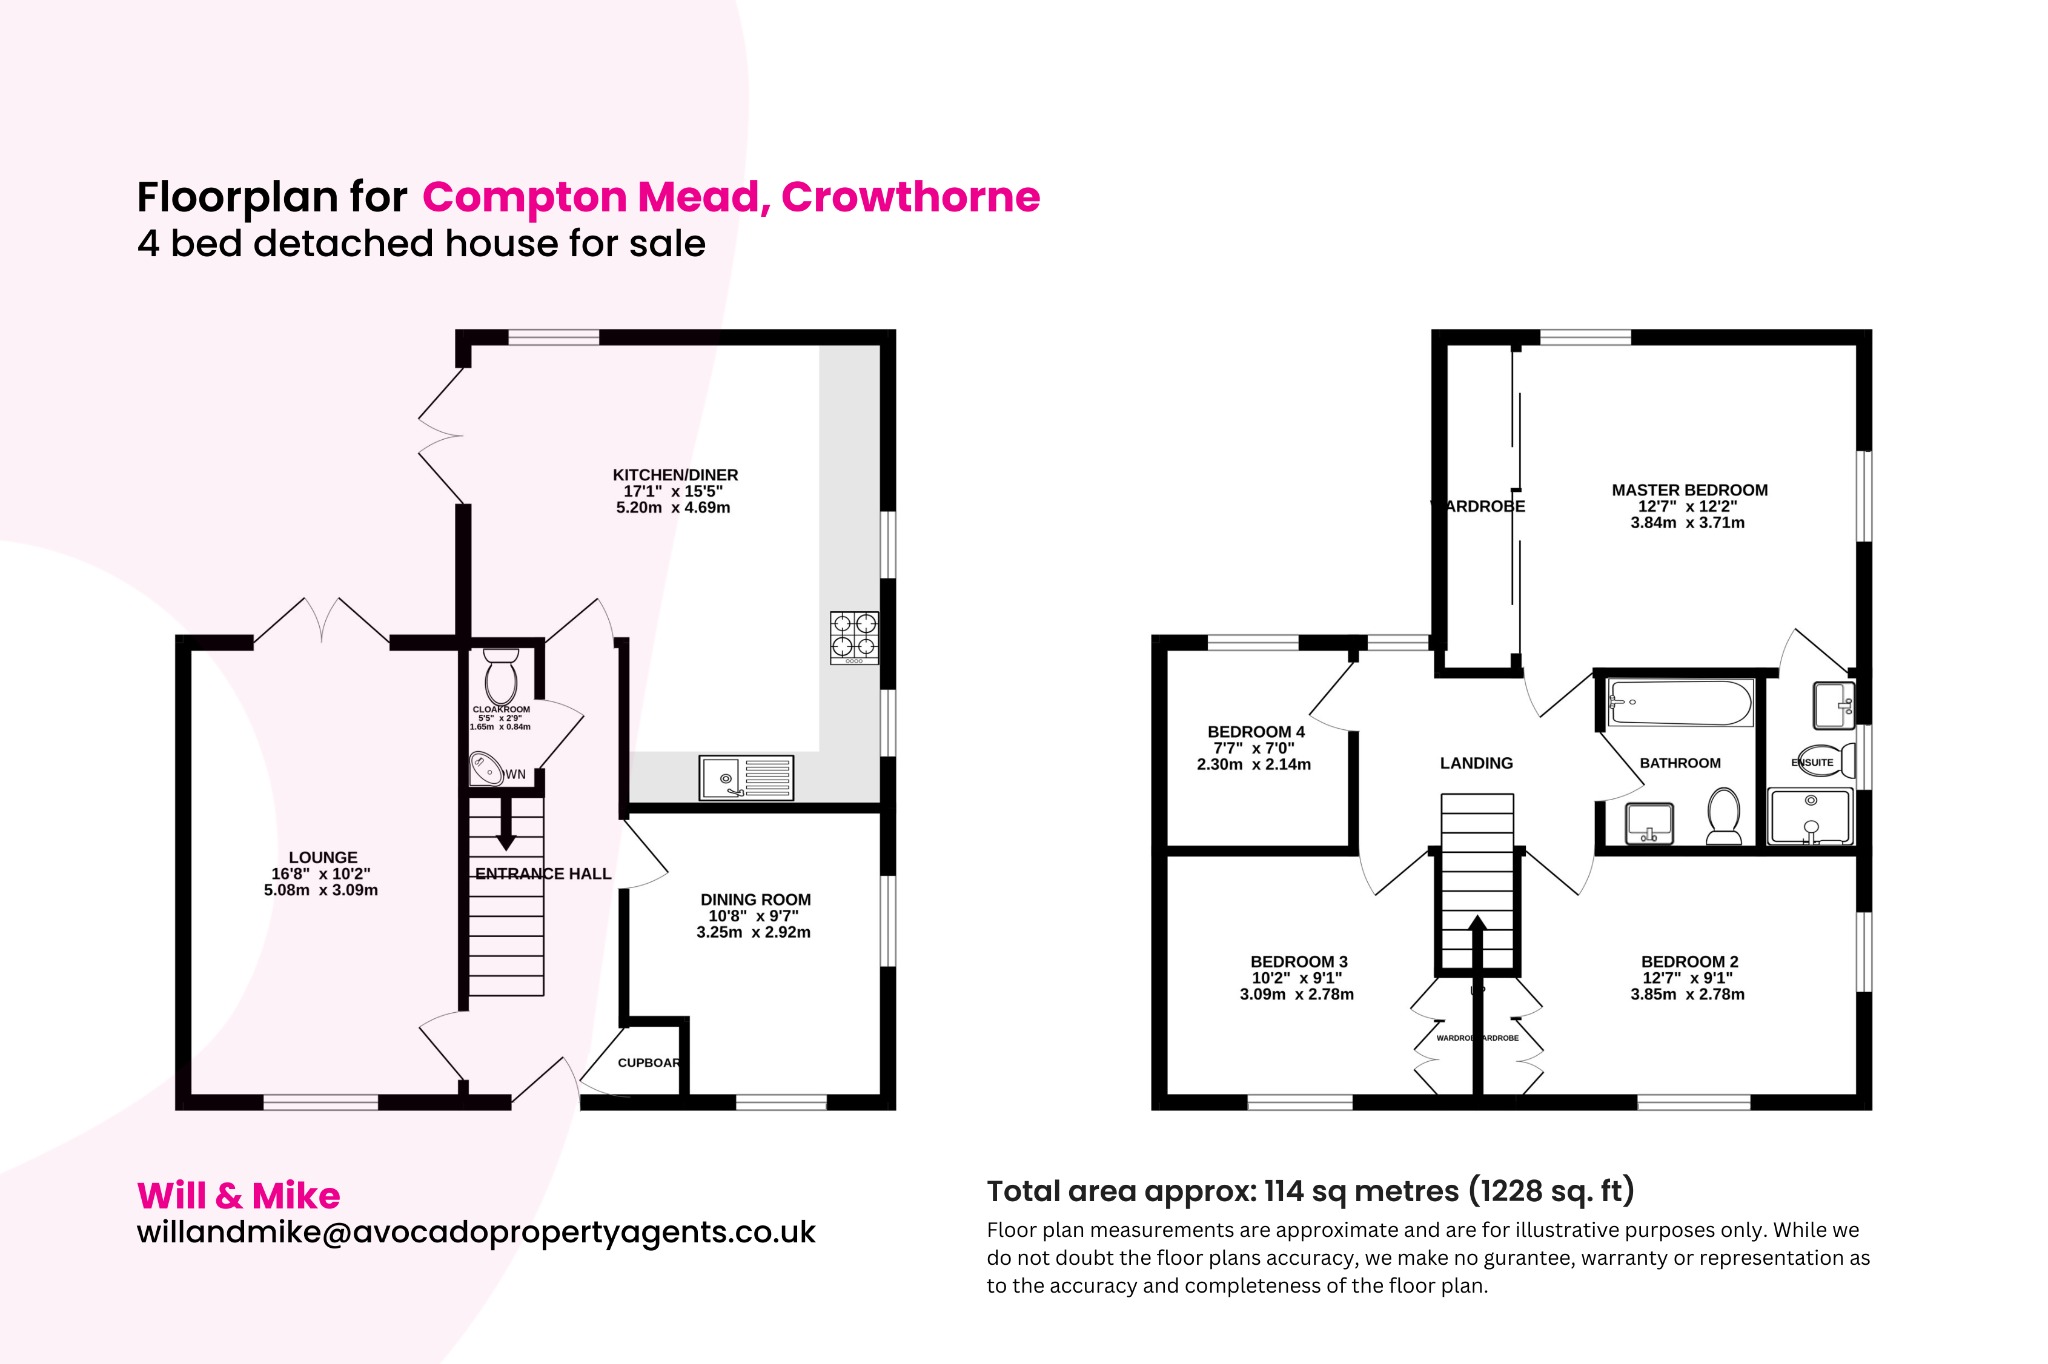 4 bed detached house for sale in Compton Mead, Crowthorne - Property floorplan